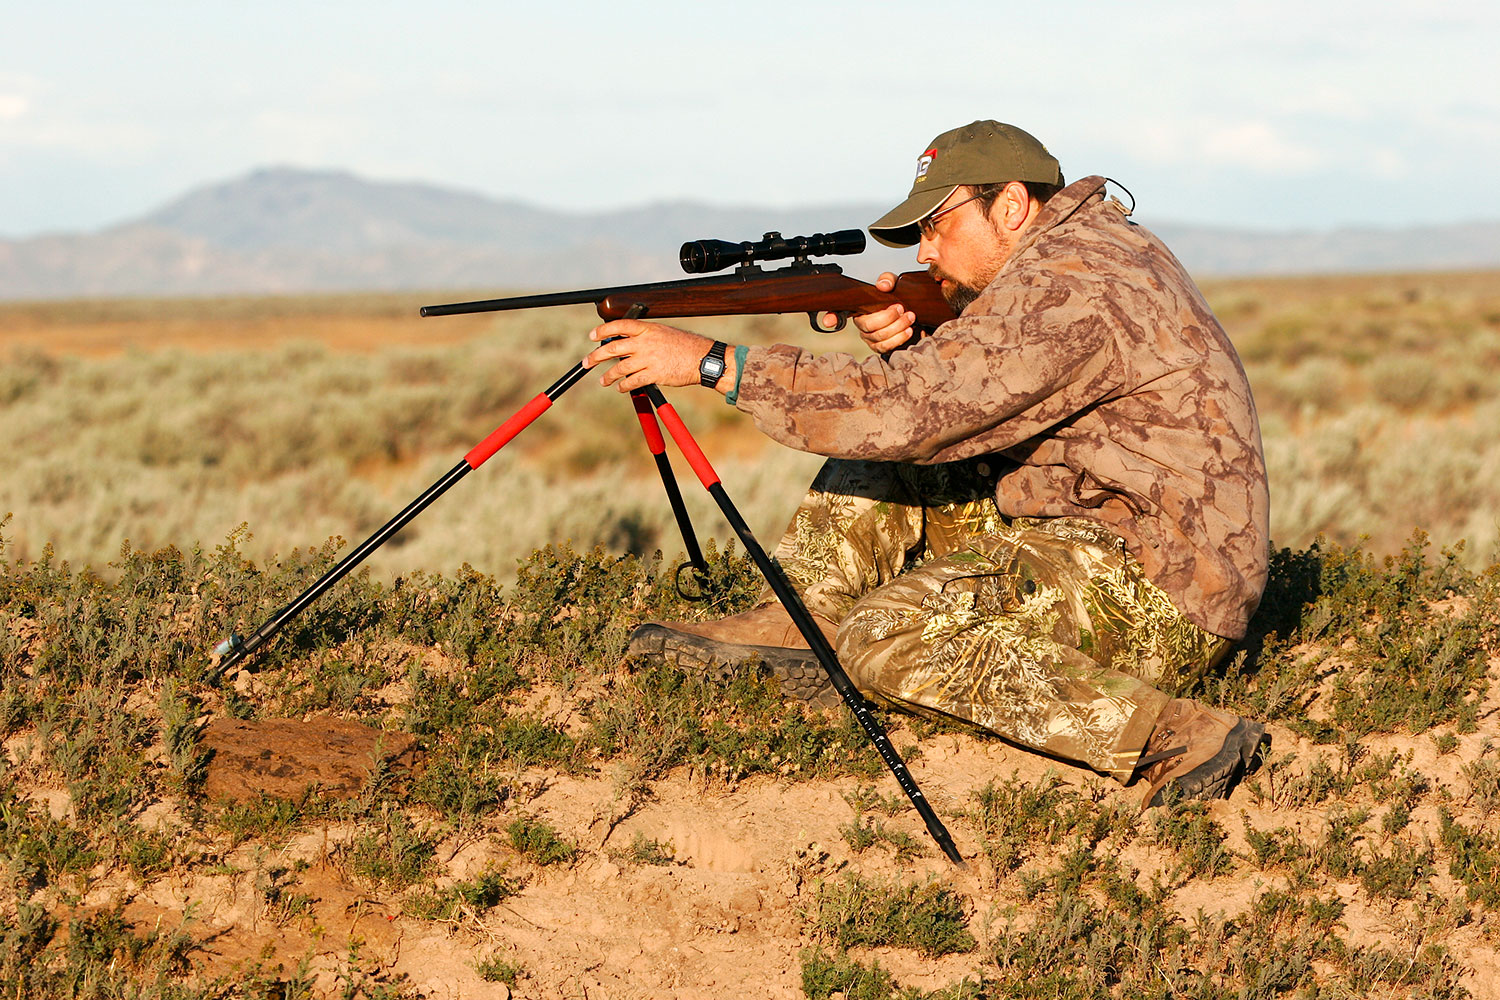 The Of Iron Sights - Rifle Sights - Optics: How To Sight In